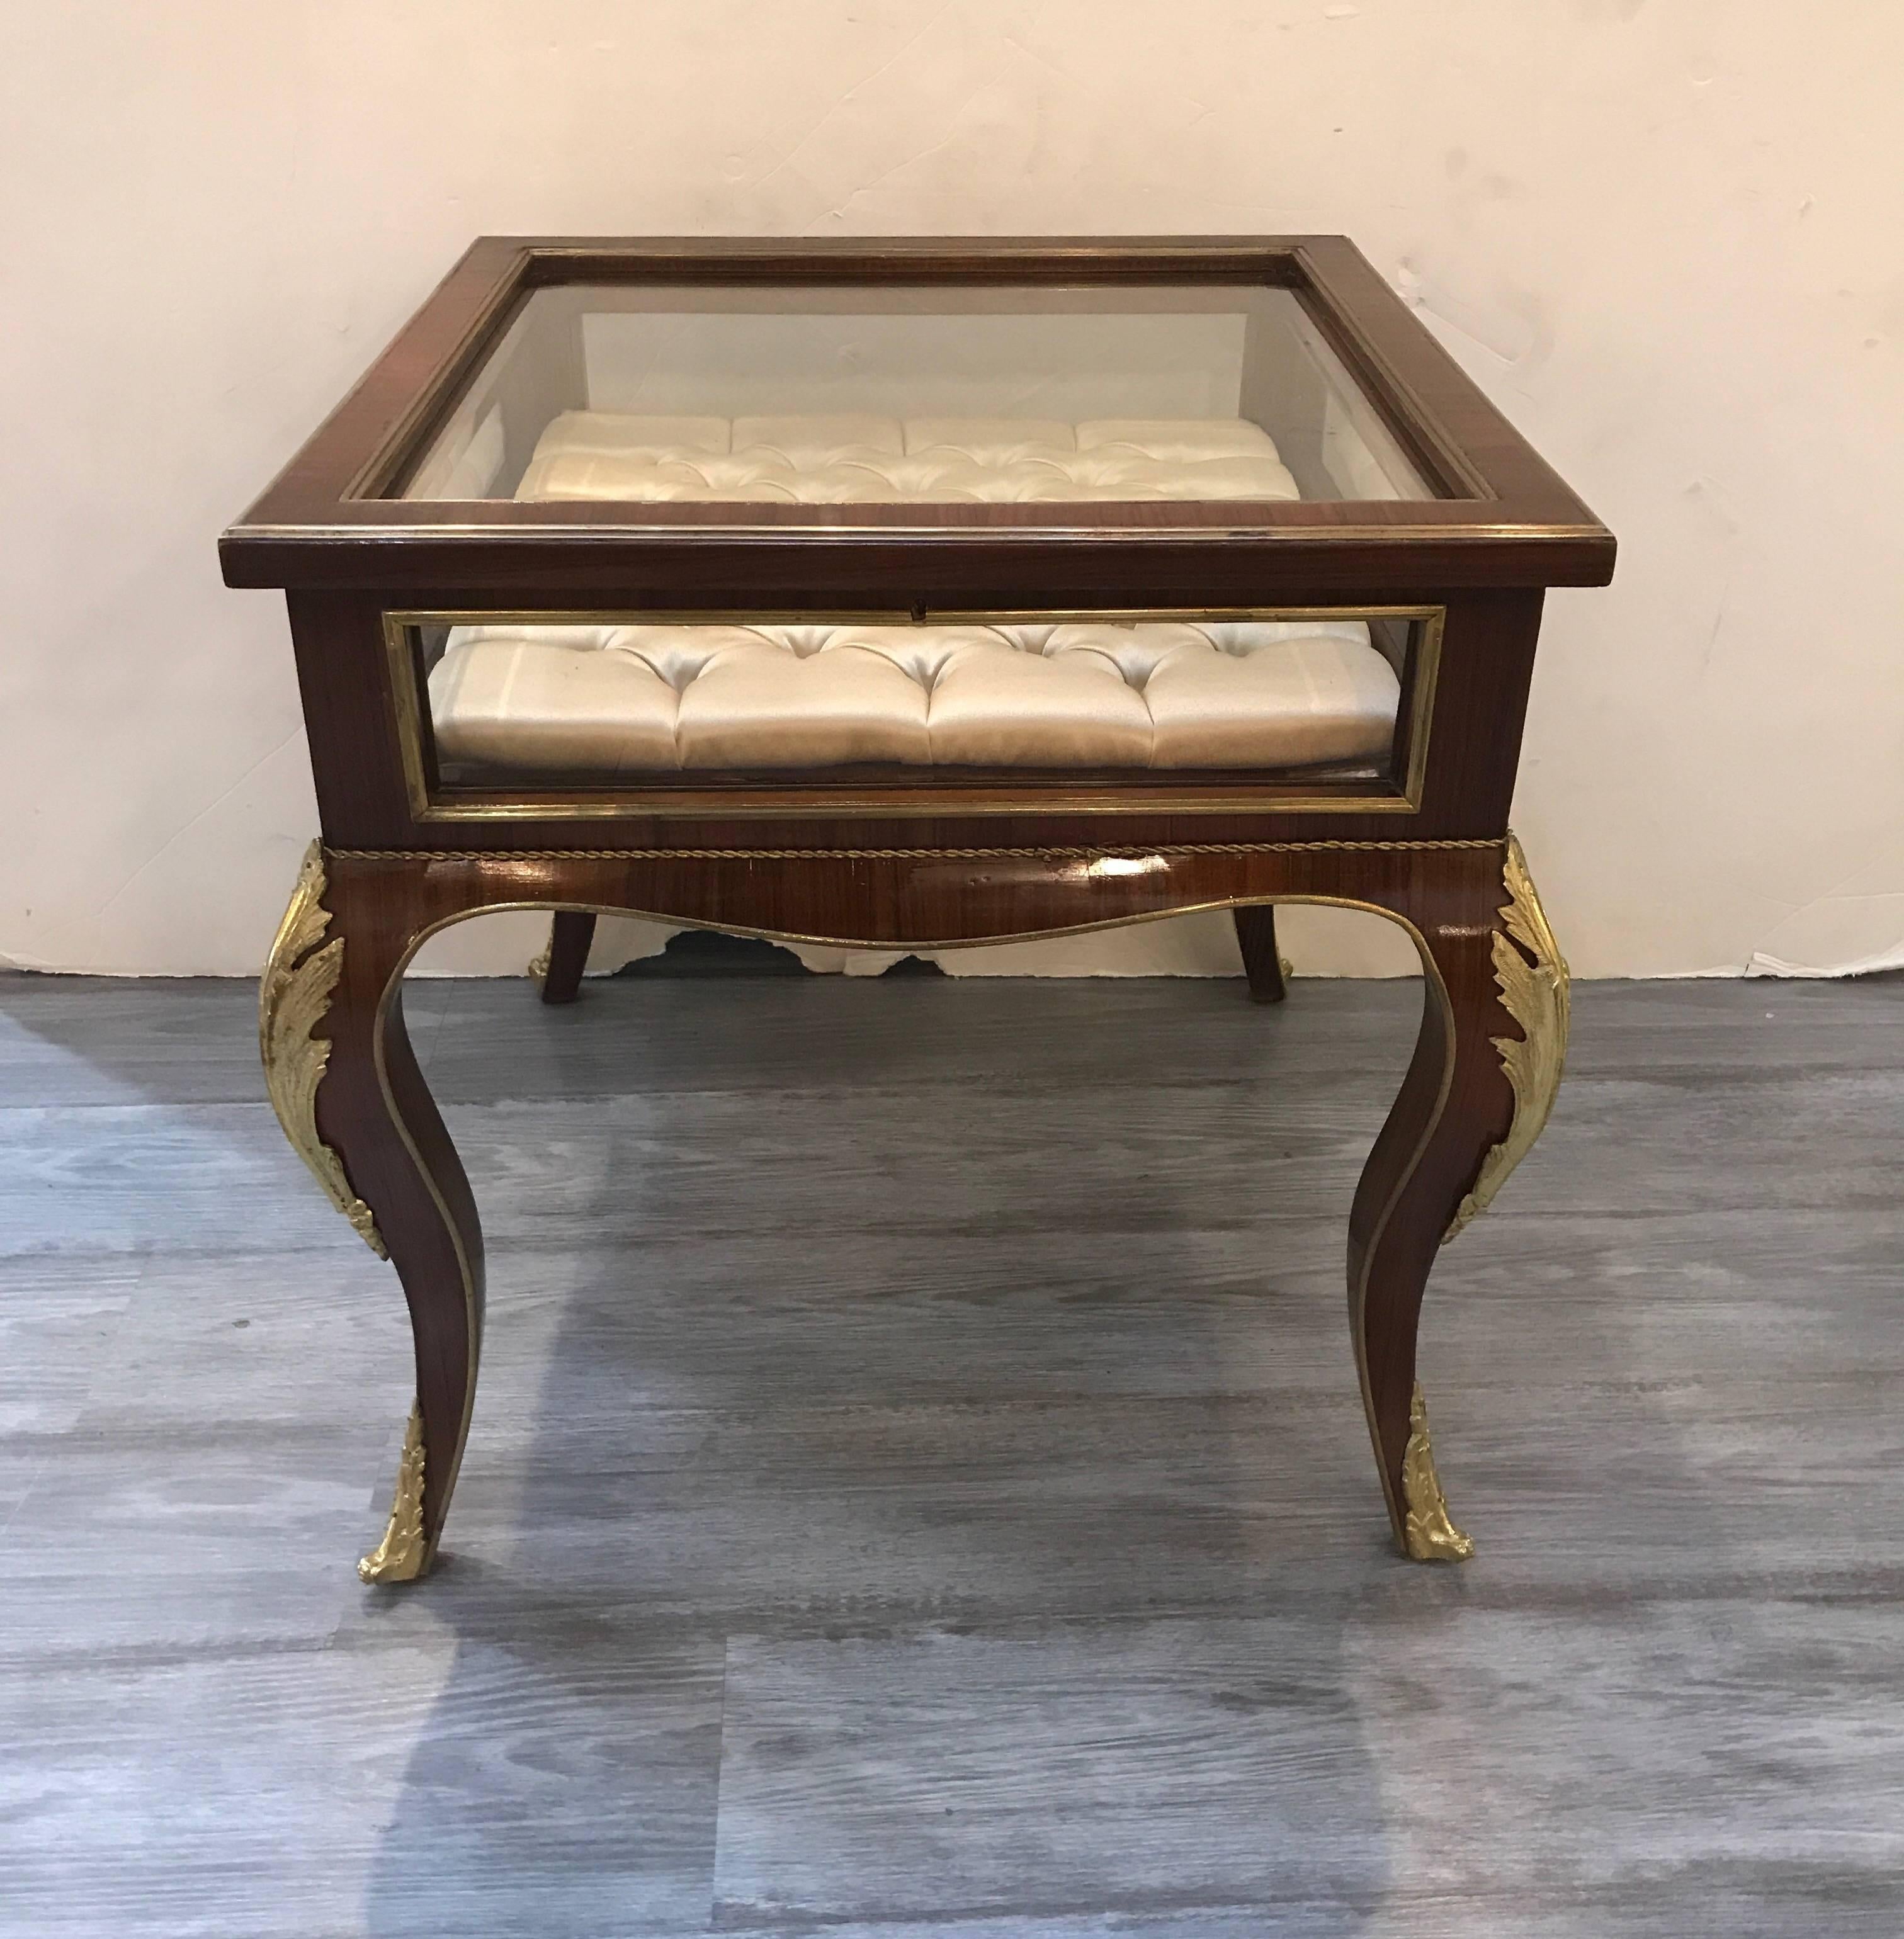 Opulent mahogany and gilt bronze-mounted lift top table vitrine. The louis XV style form with bronze trim and foliate mounts on the knees, the silk tufted interior with glass side panels and lift up door to display a treasured item or collection.